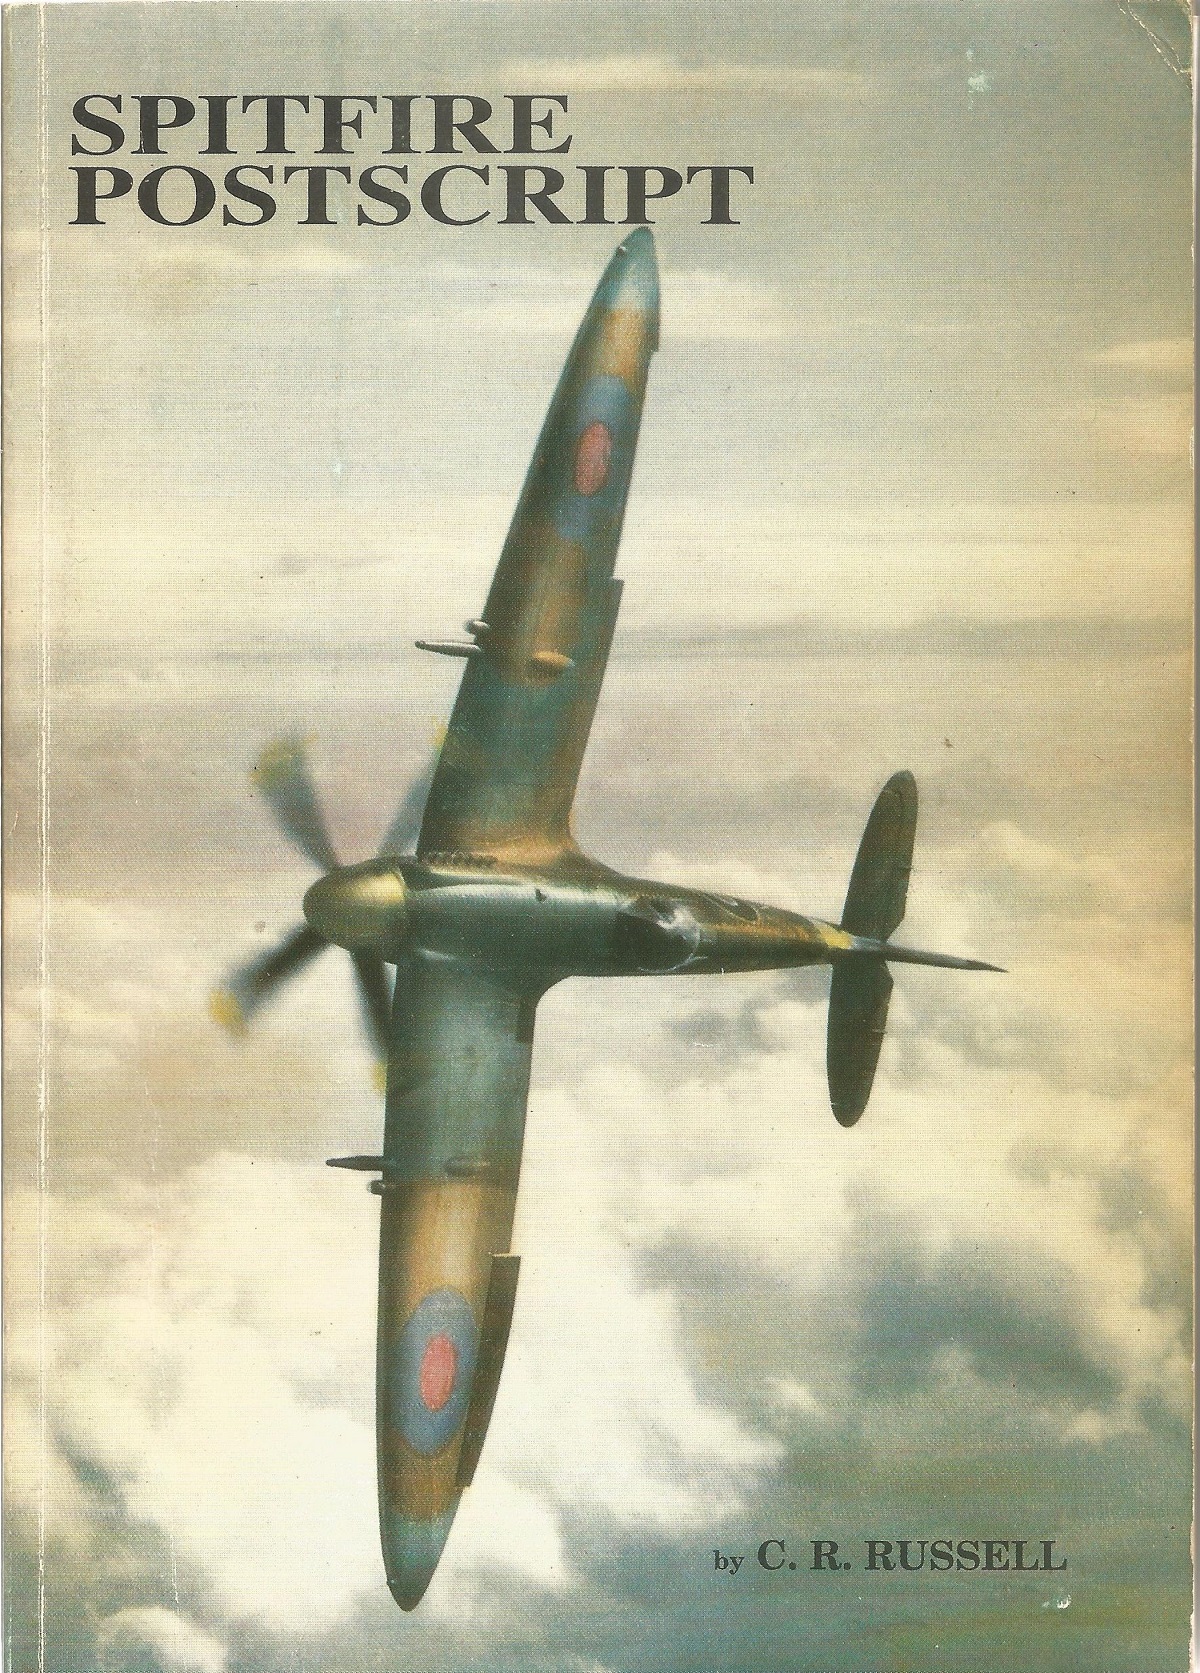 C R Russell. Spitfire Postscript. A WW2 paperback book. The book itself is unsigned. A 204 paged